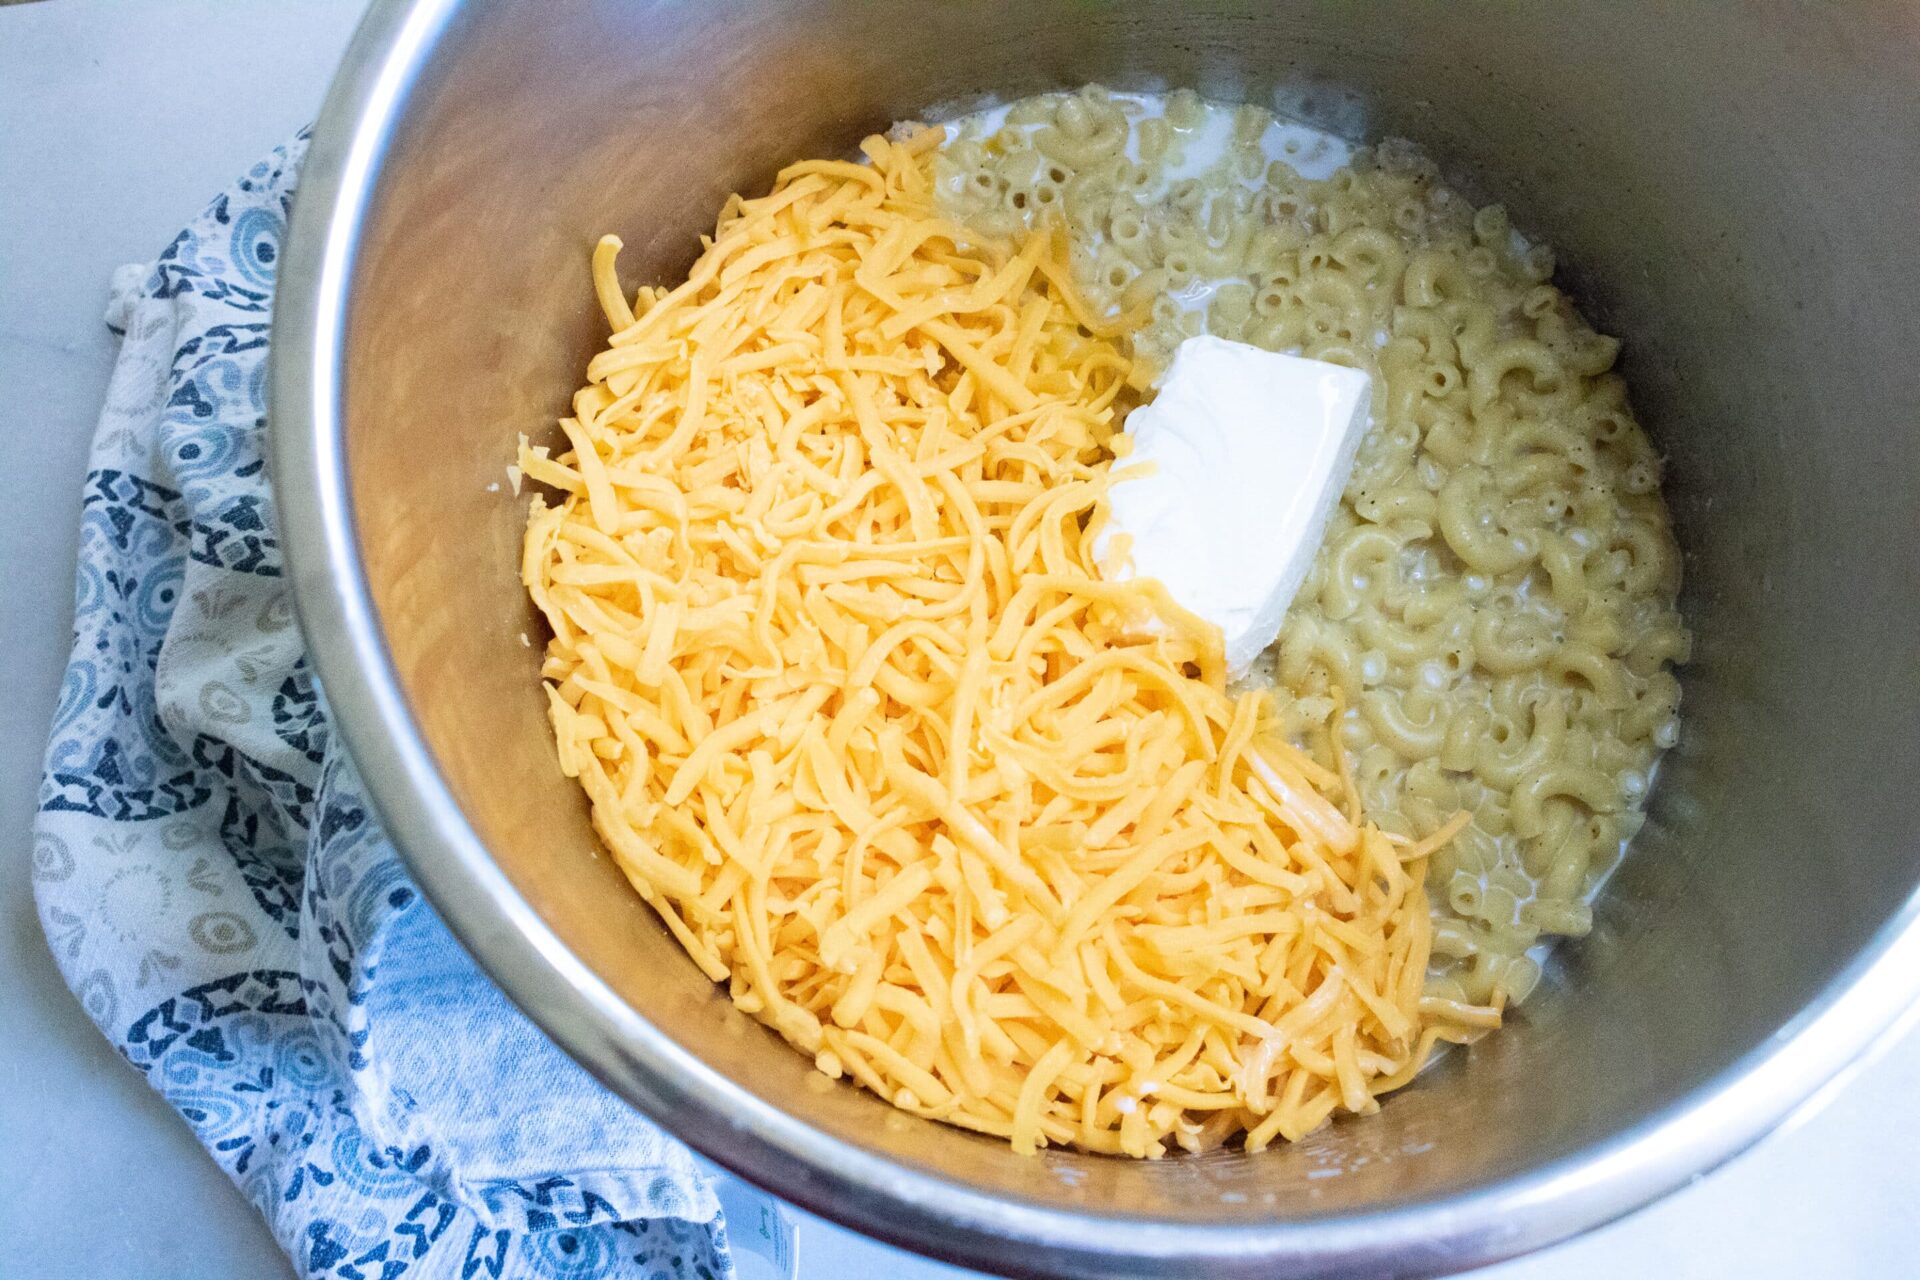 add the cream cheese and cheddar cheese. Stir it all together to melt the cheese. While the cheese is melting add the milk a little at a time. When finished you should have a creamy, delicious pot of mac n cheese.